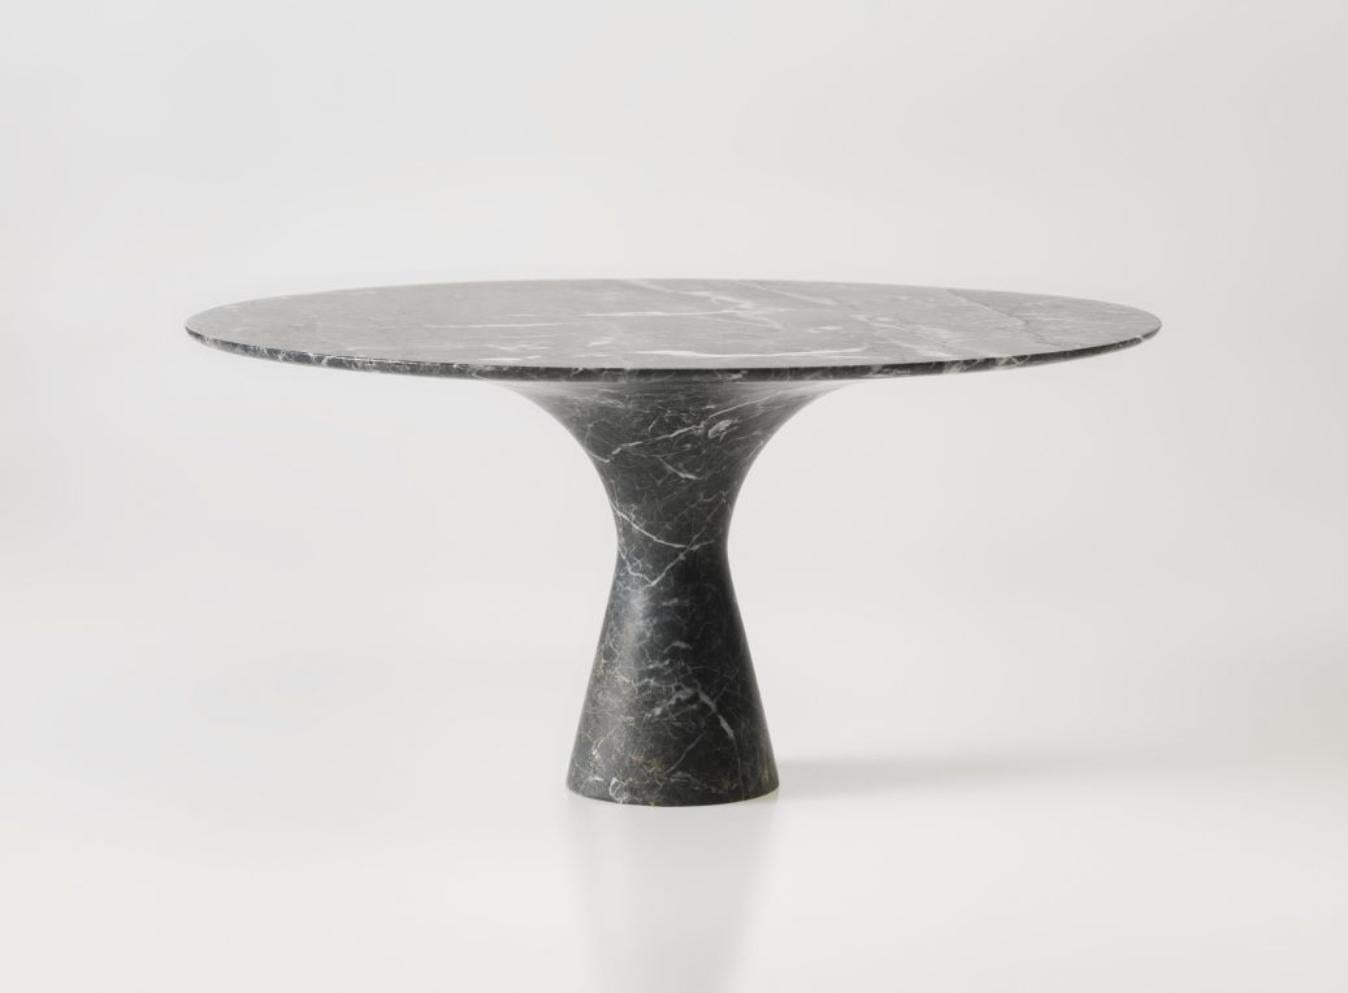 Grey Saint Laurent refined contemporary marble dining table 160/75
Dimensions: 160 x 75 cm
Materials: Grey Saint Laurent

Angelo is the essence of a round table in natural stone, a sculptural shape in robust material with elegant lines and